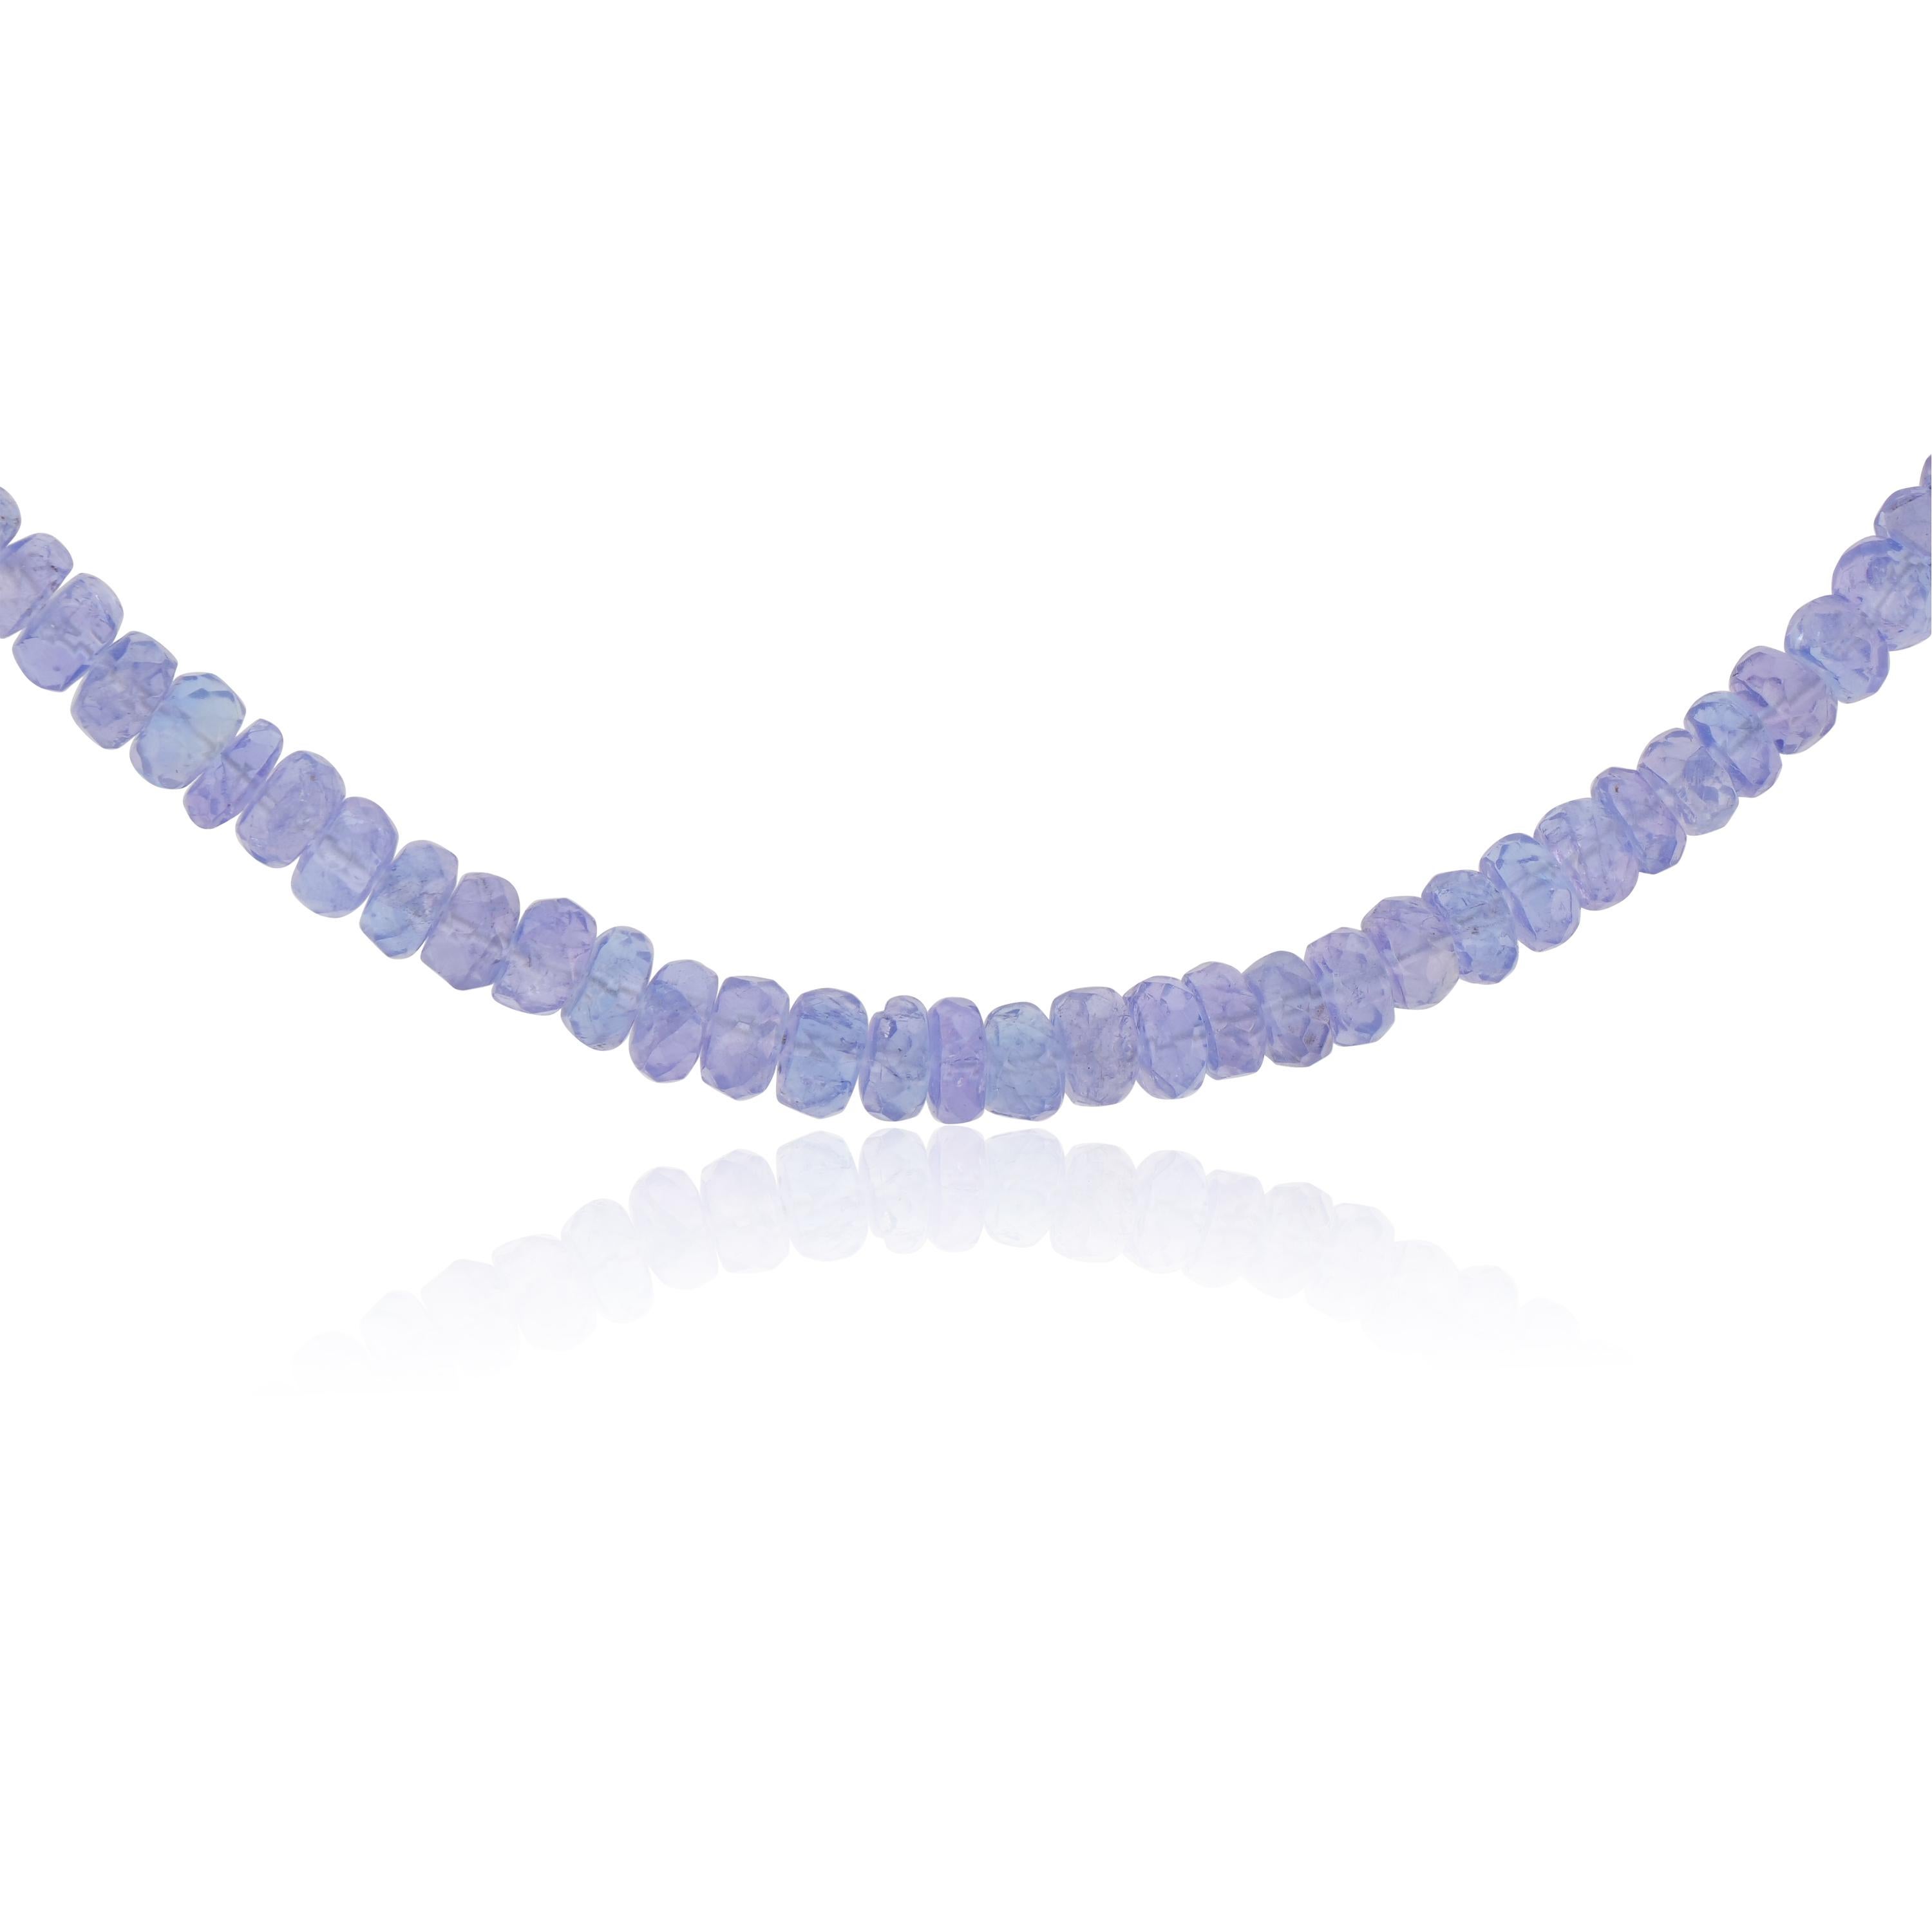 Known to be the birthstone of December, Tanzanites have such regal flair. Featured by Gemistry with 56.57Ct in round faceted beads is set in genuine 925 sterling silver and is nickel-free. This women's necklace has a hanging length is 18